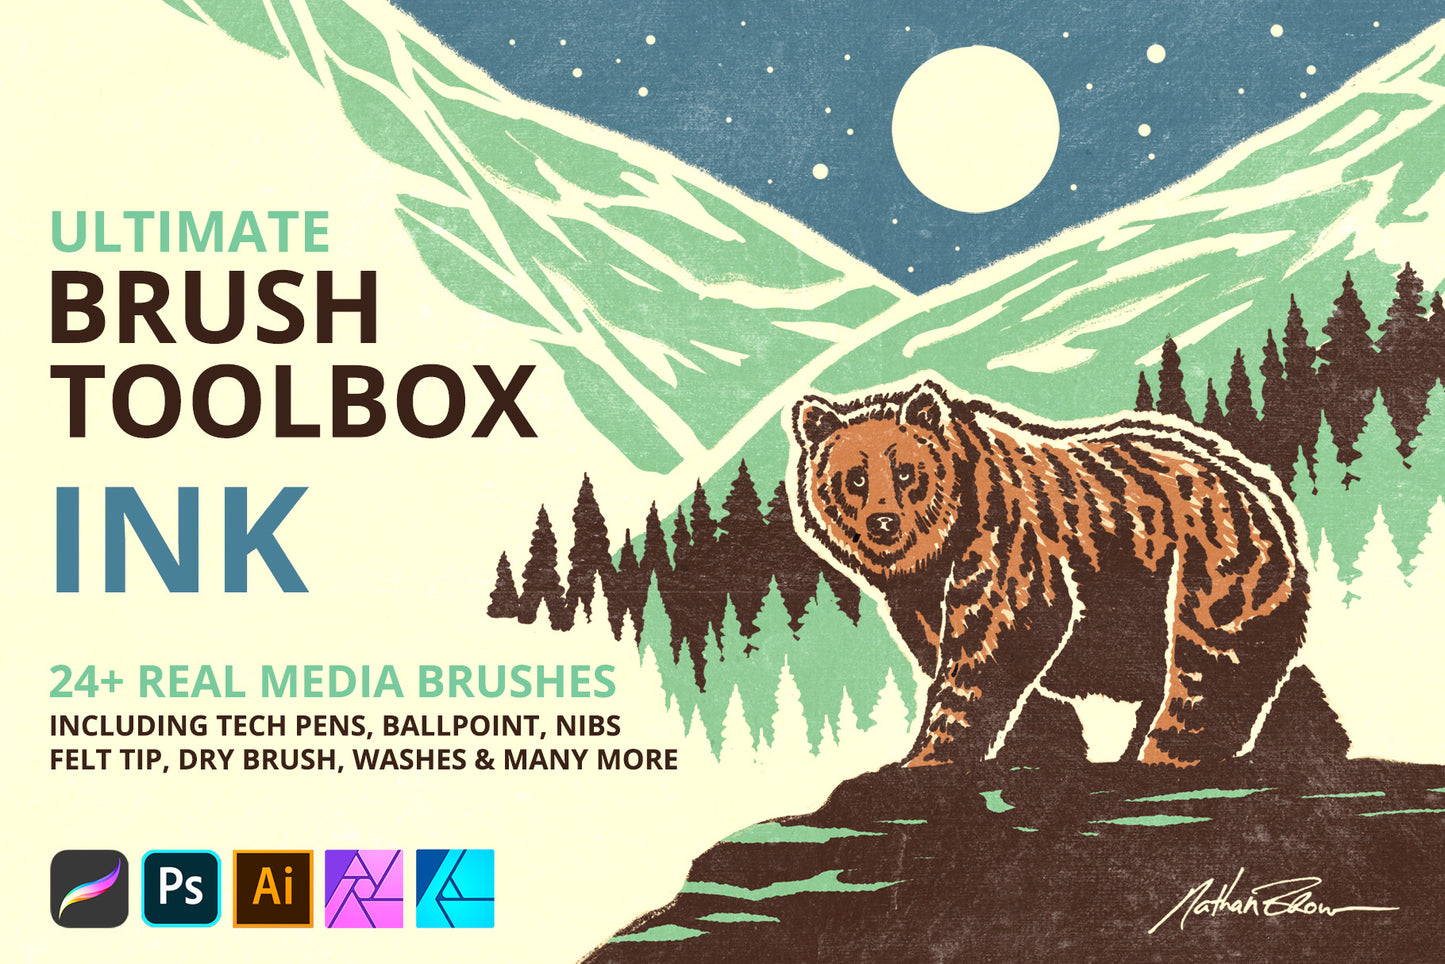 Ultimate Brush Toolbox – Ink Brushes